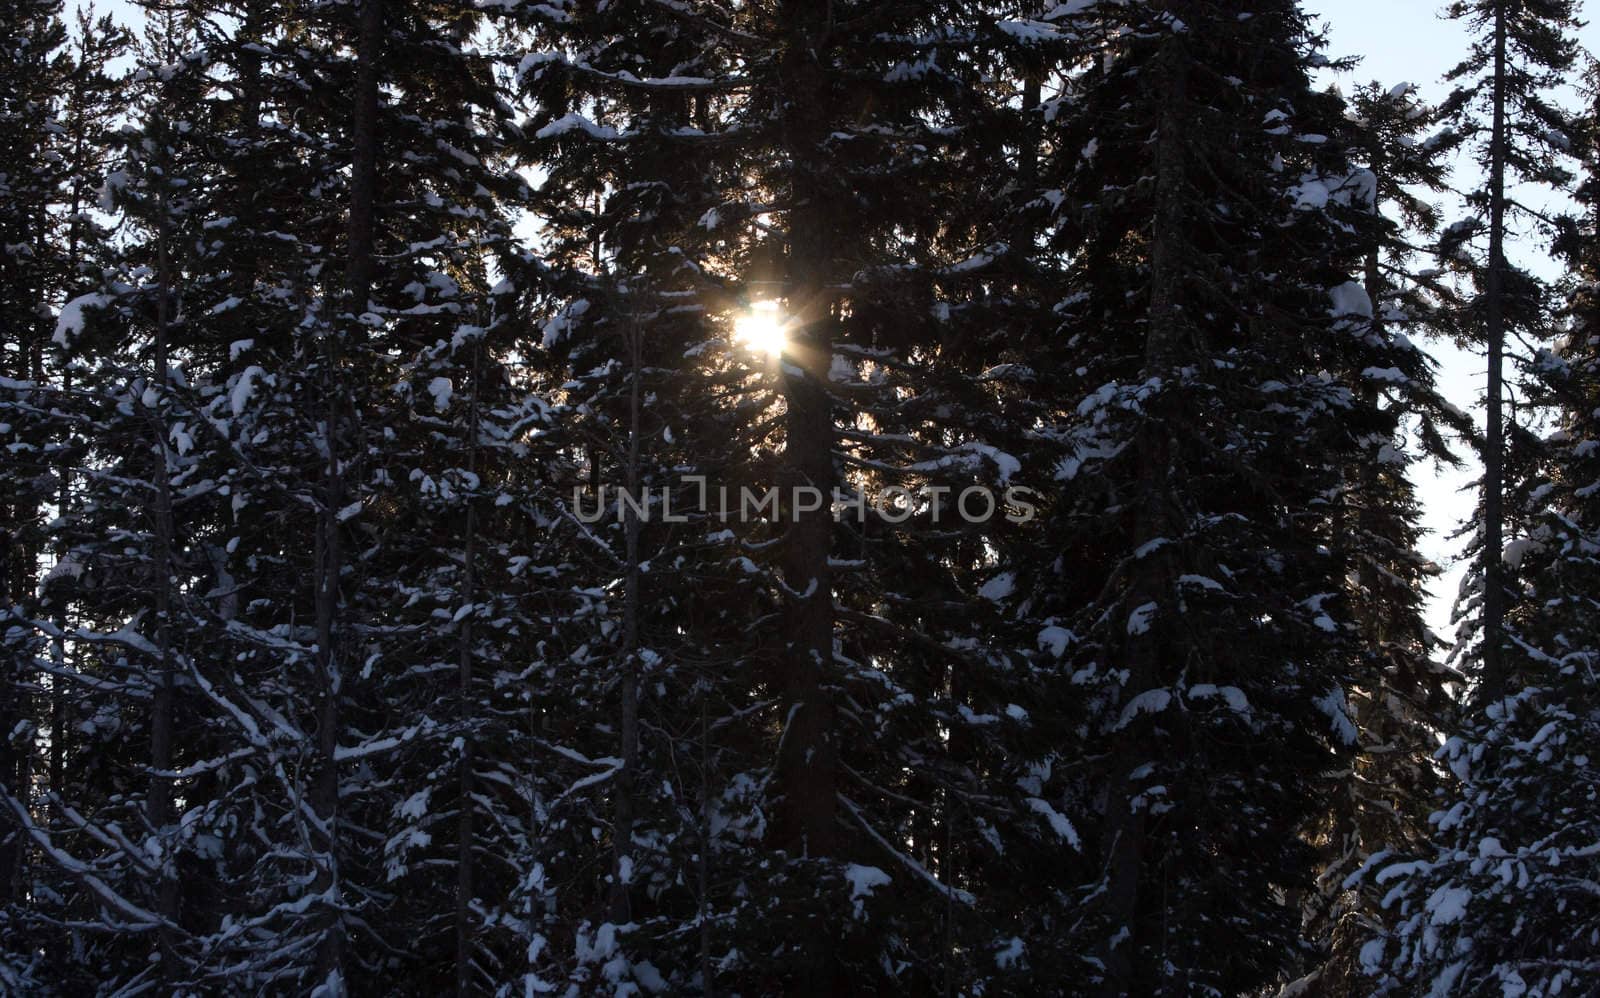 Sunliight Through the Trees.  Photo taken in the Mount Hood National Forest, OR. by sandsphoto